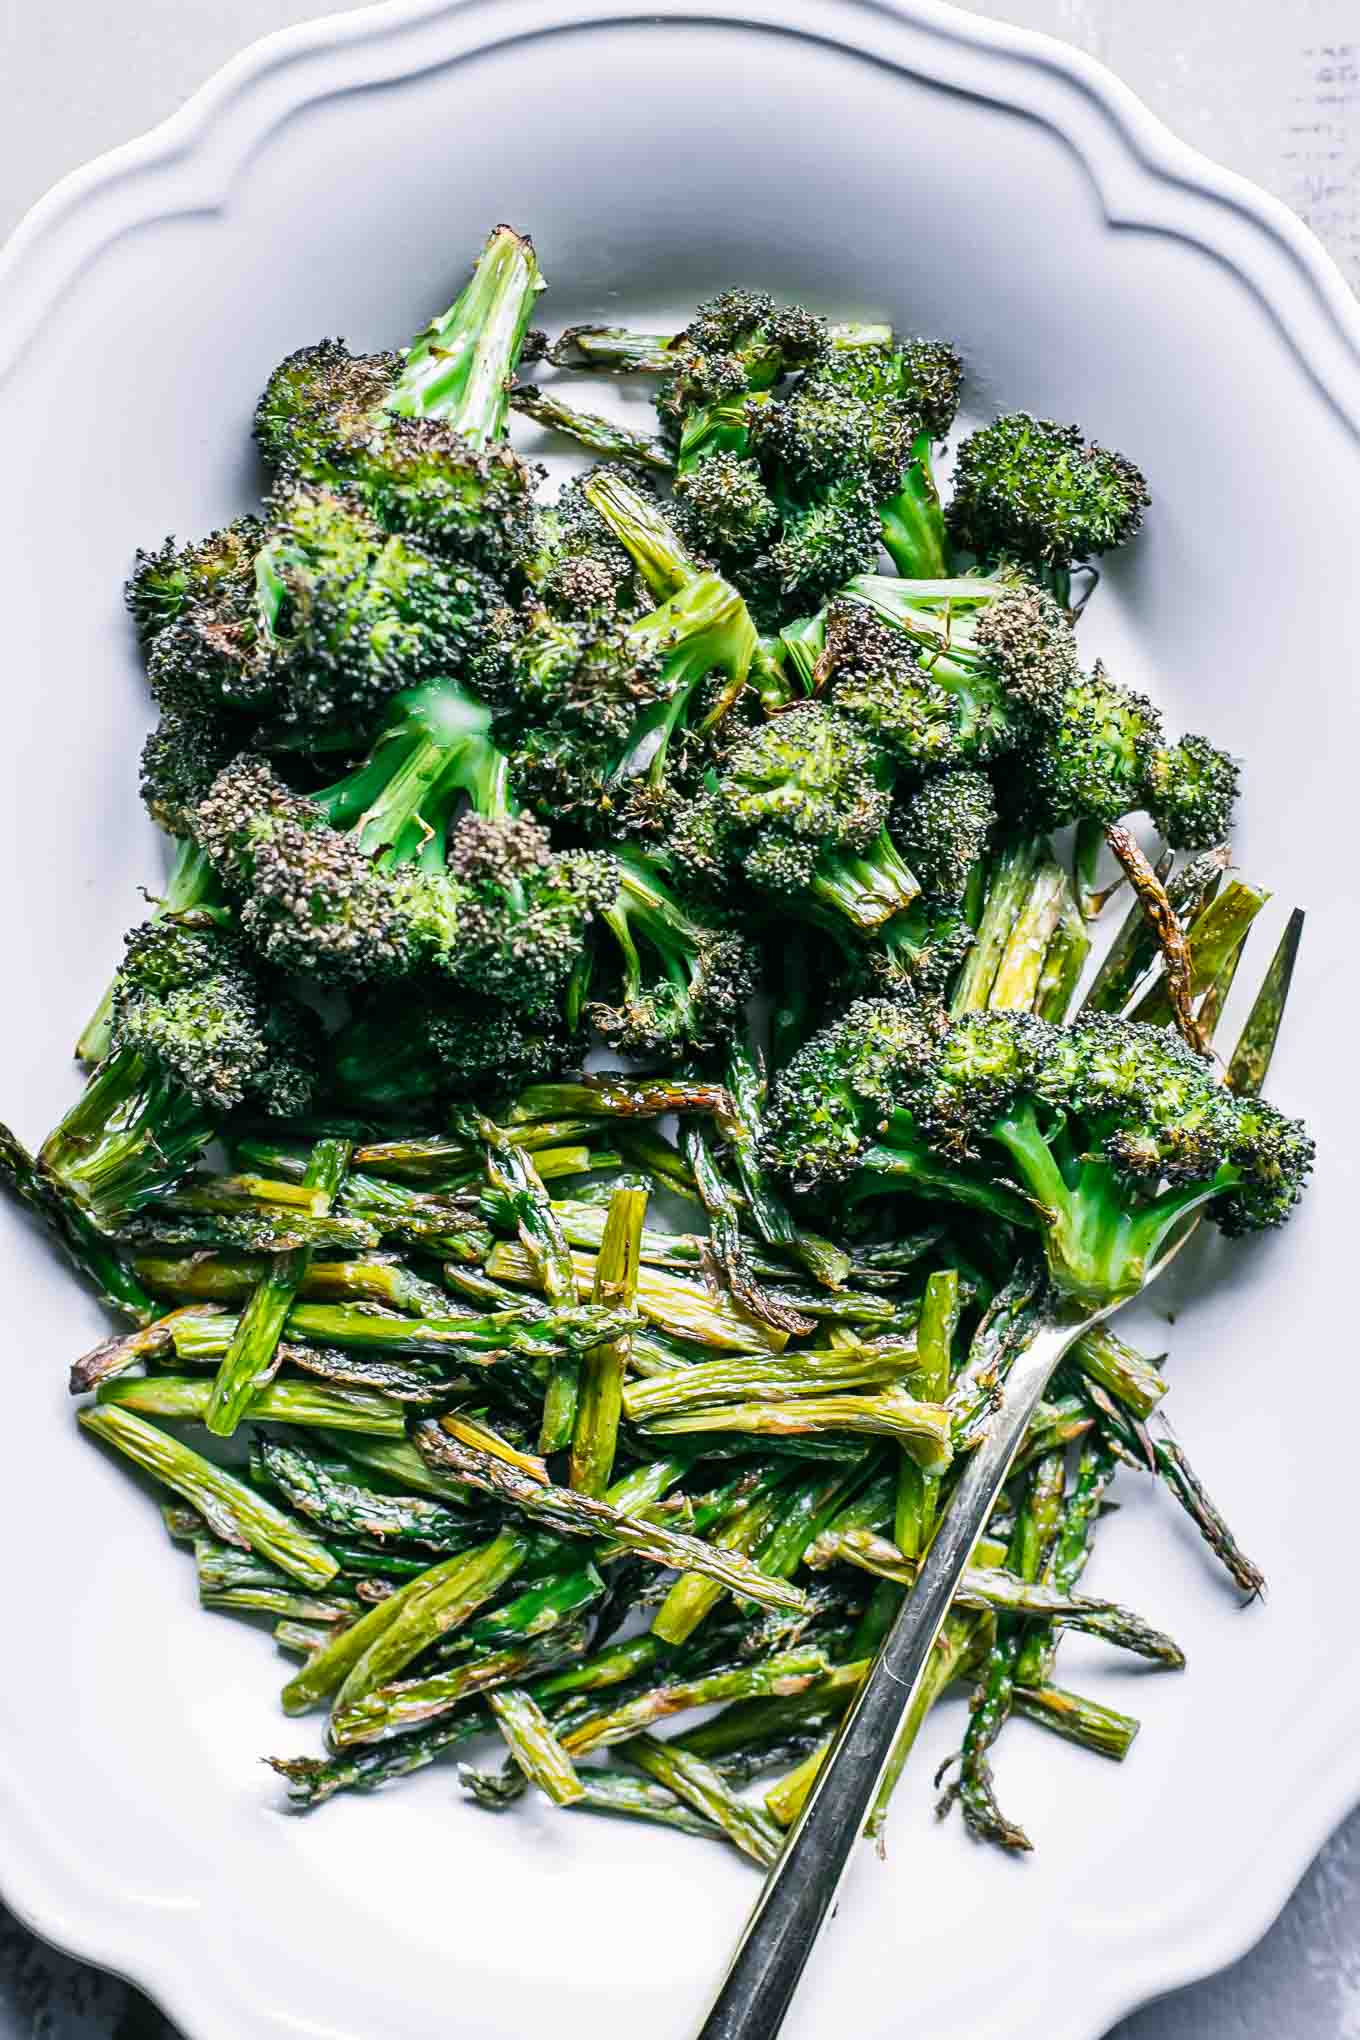 roasted broccoli and baked asparagus on a white plate